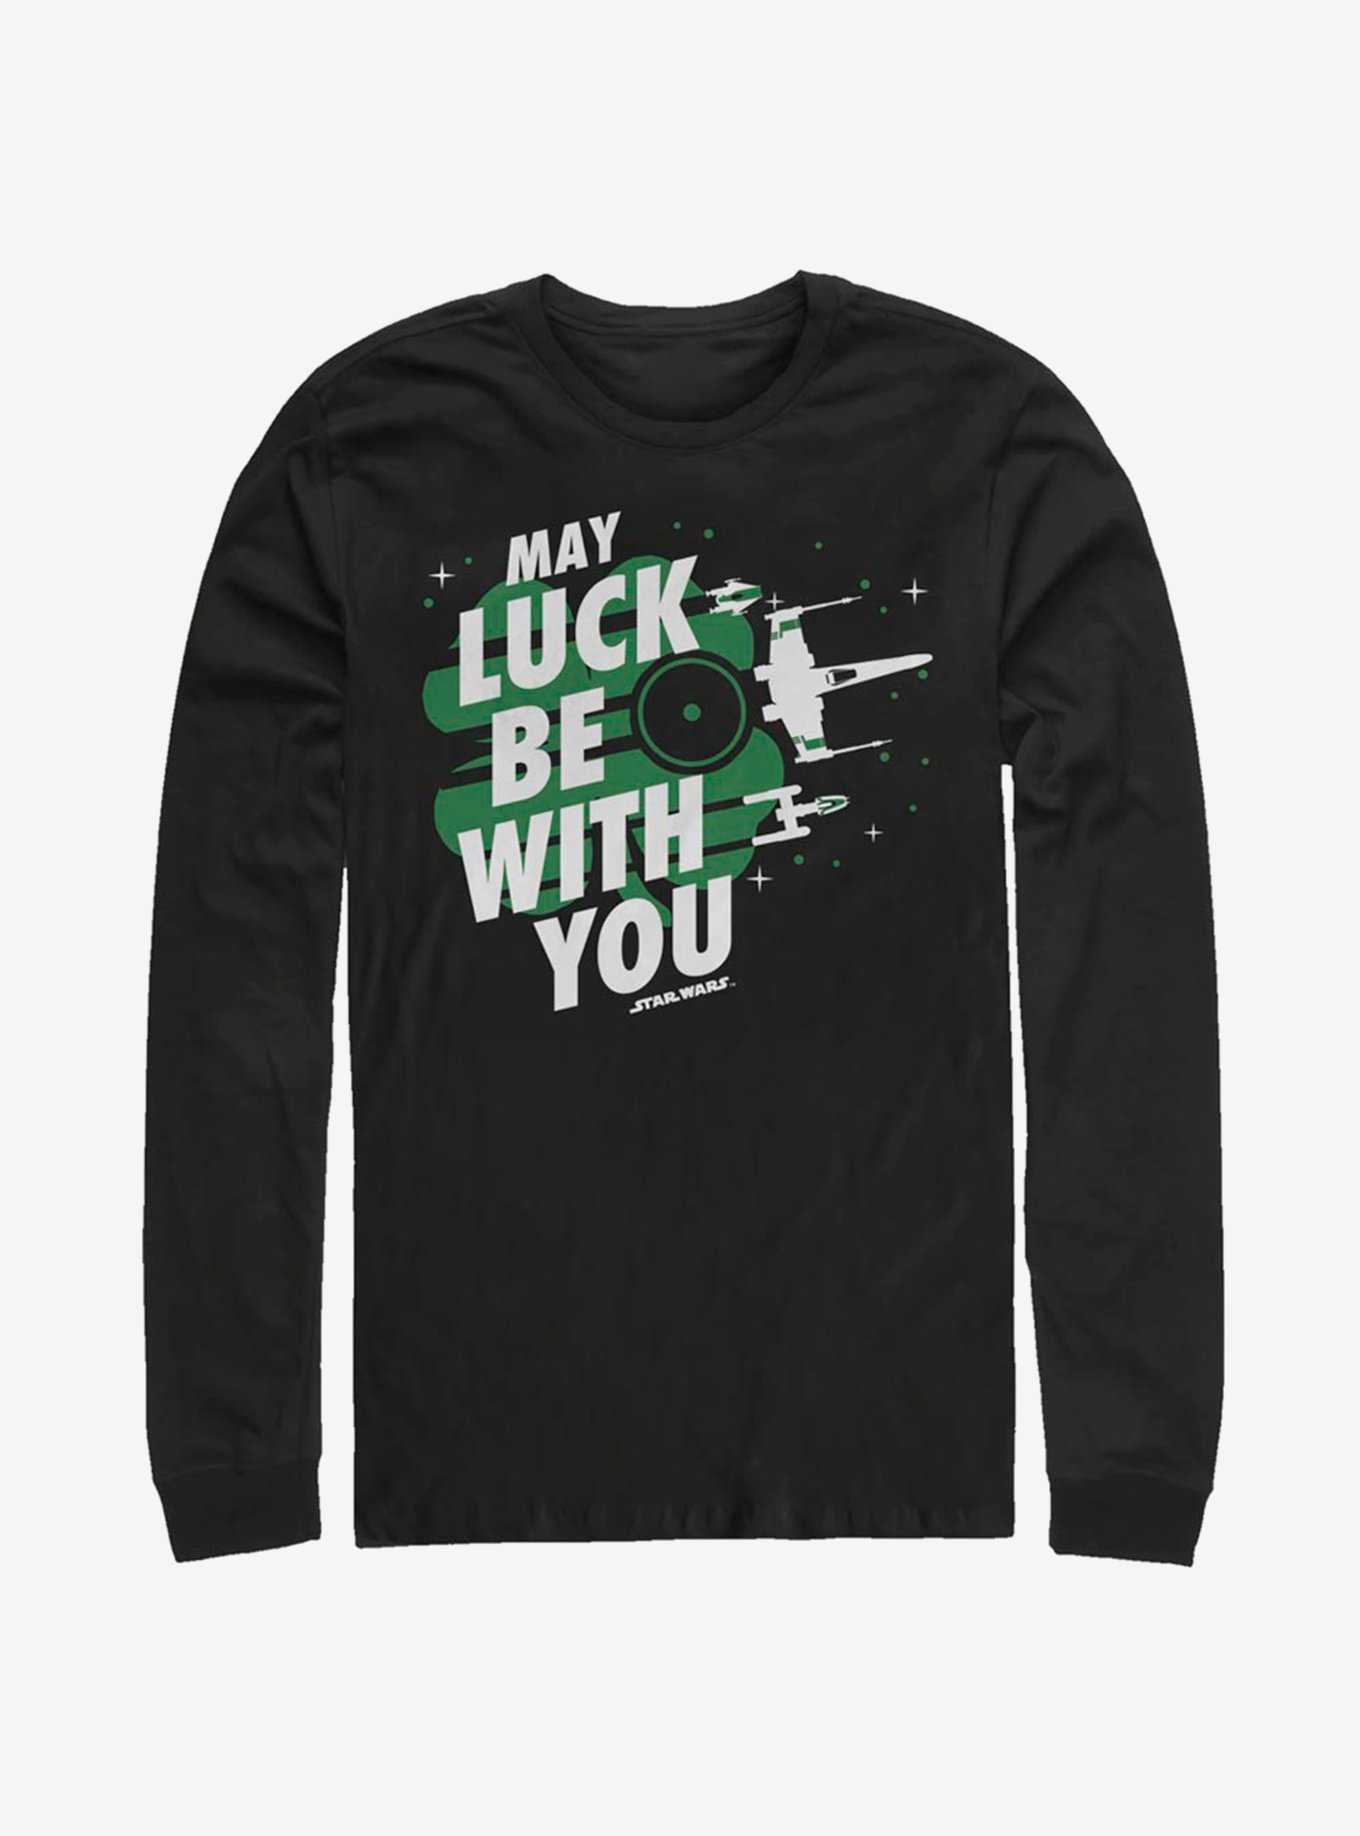 Star Wars Luck Fighters Long-Sleeve T-Shirt, , hi-res